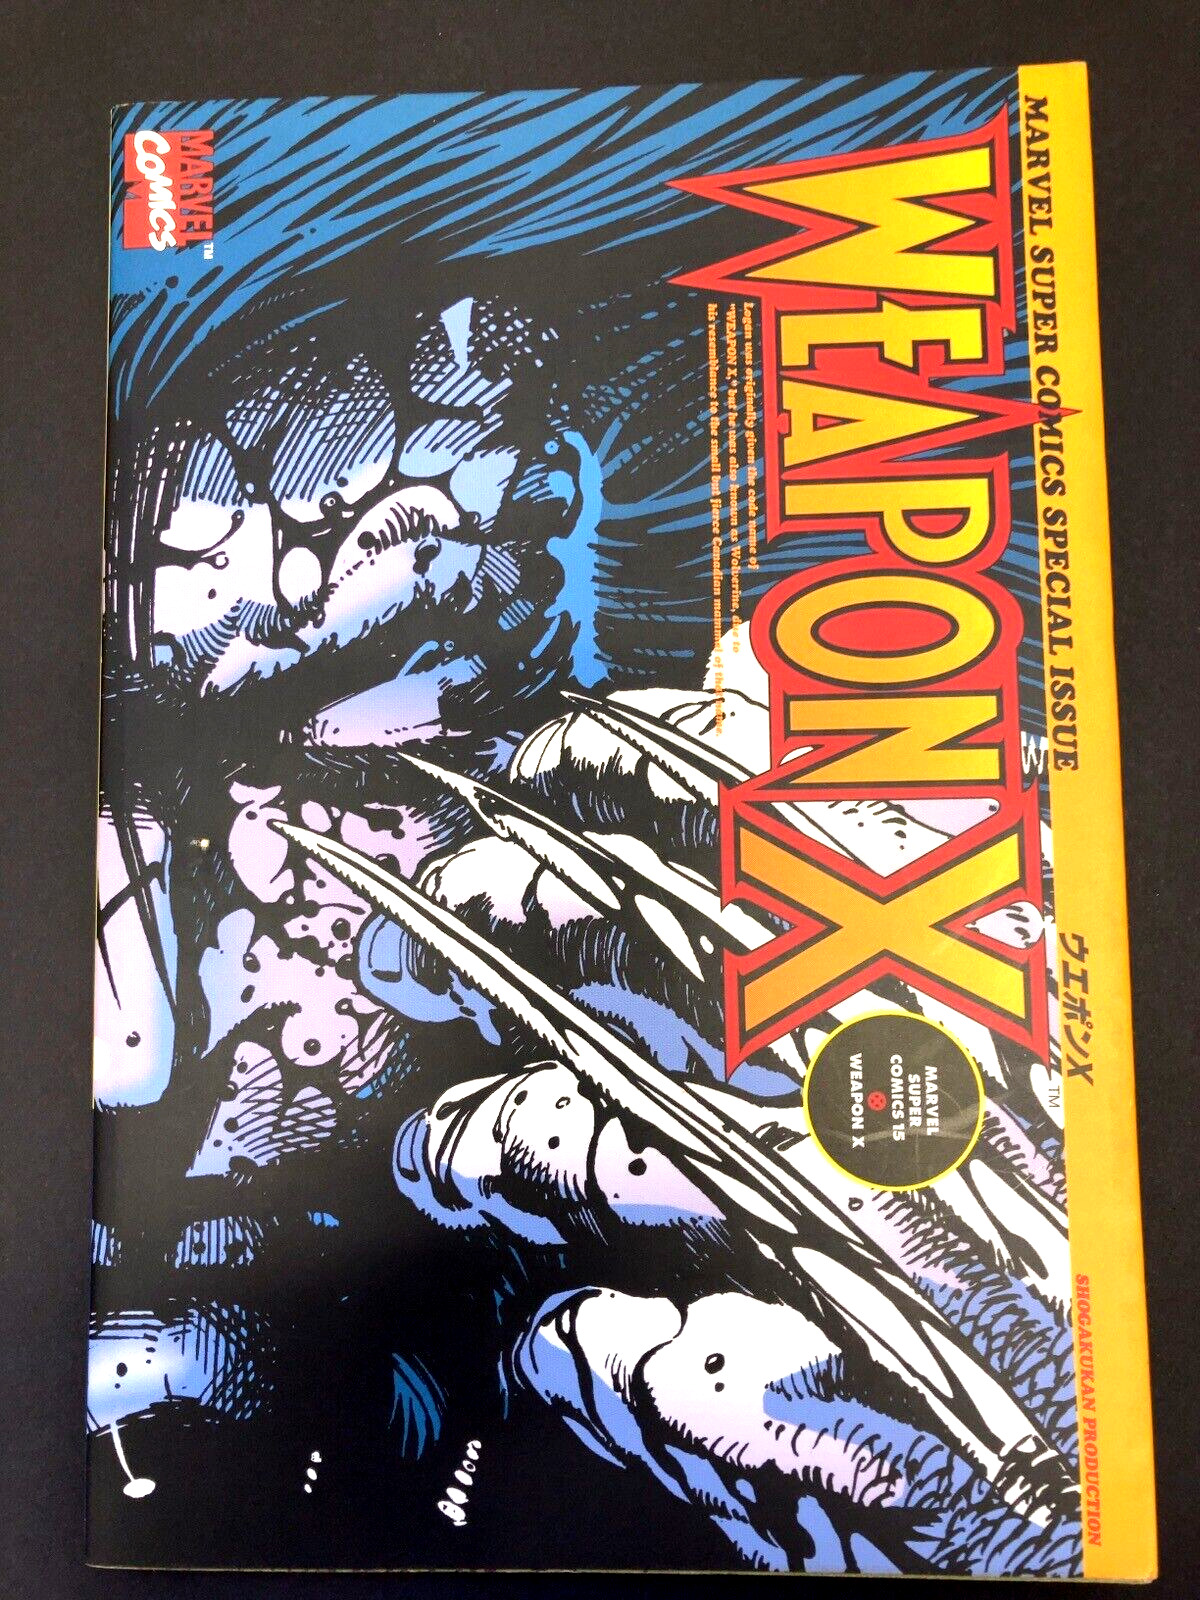 Japanese WEAPON X SHOPRO MARVEL X-MEN 1995 Barry Windsor Smith out of print rare